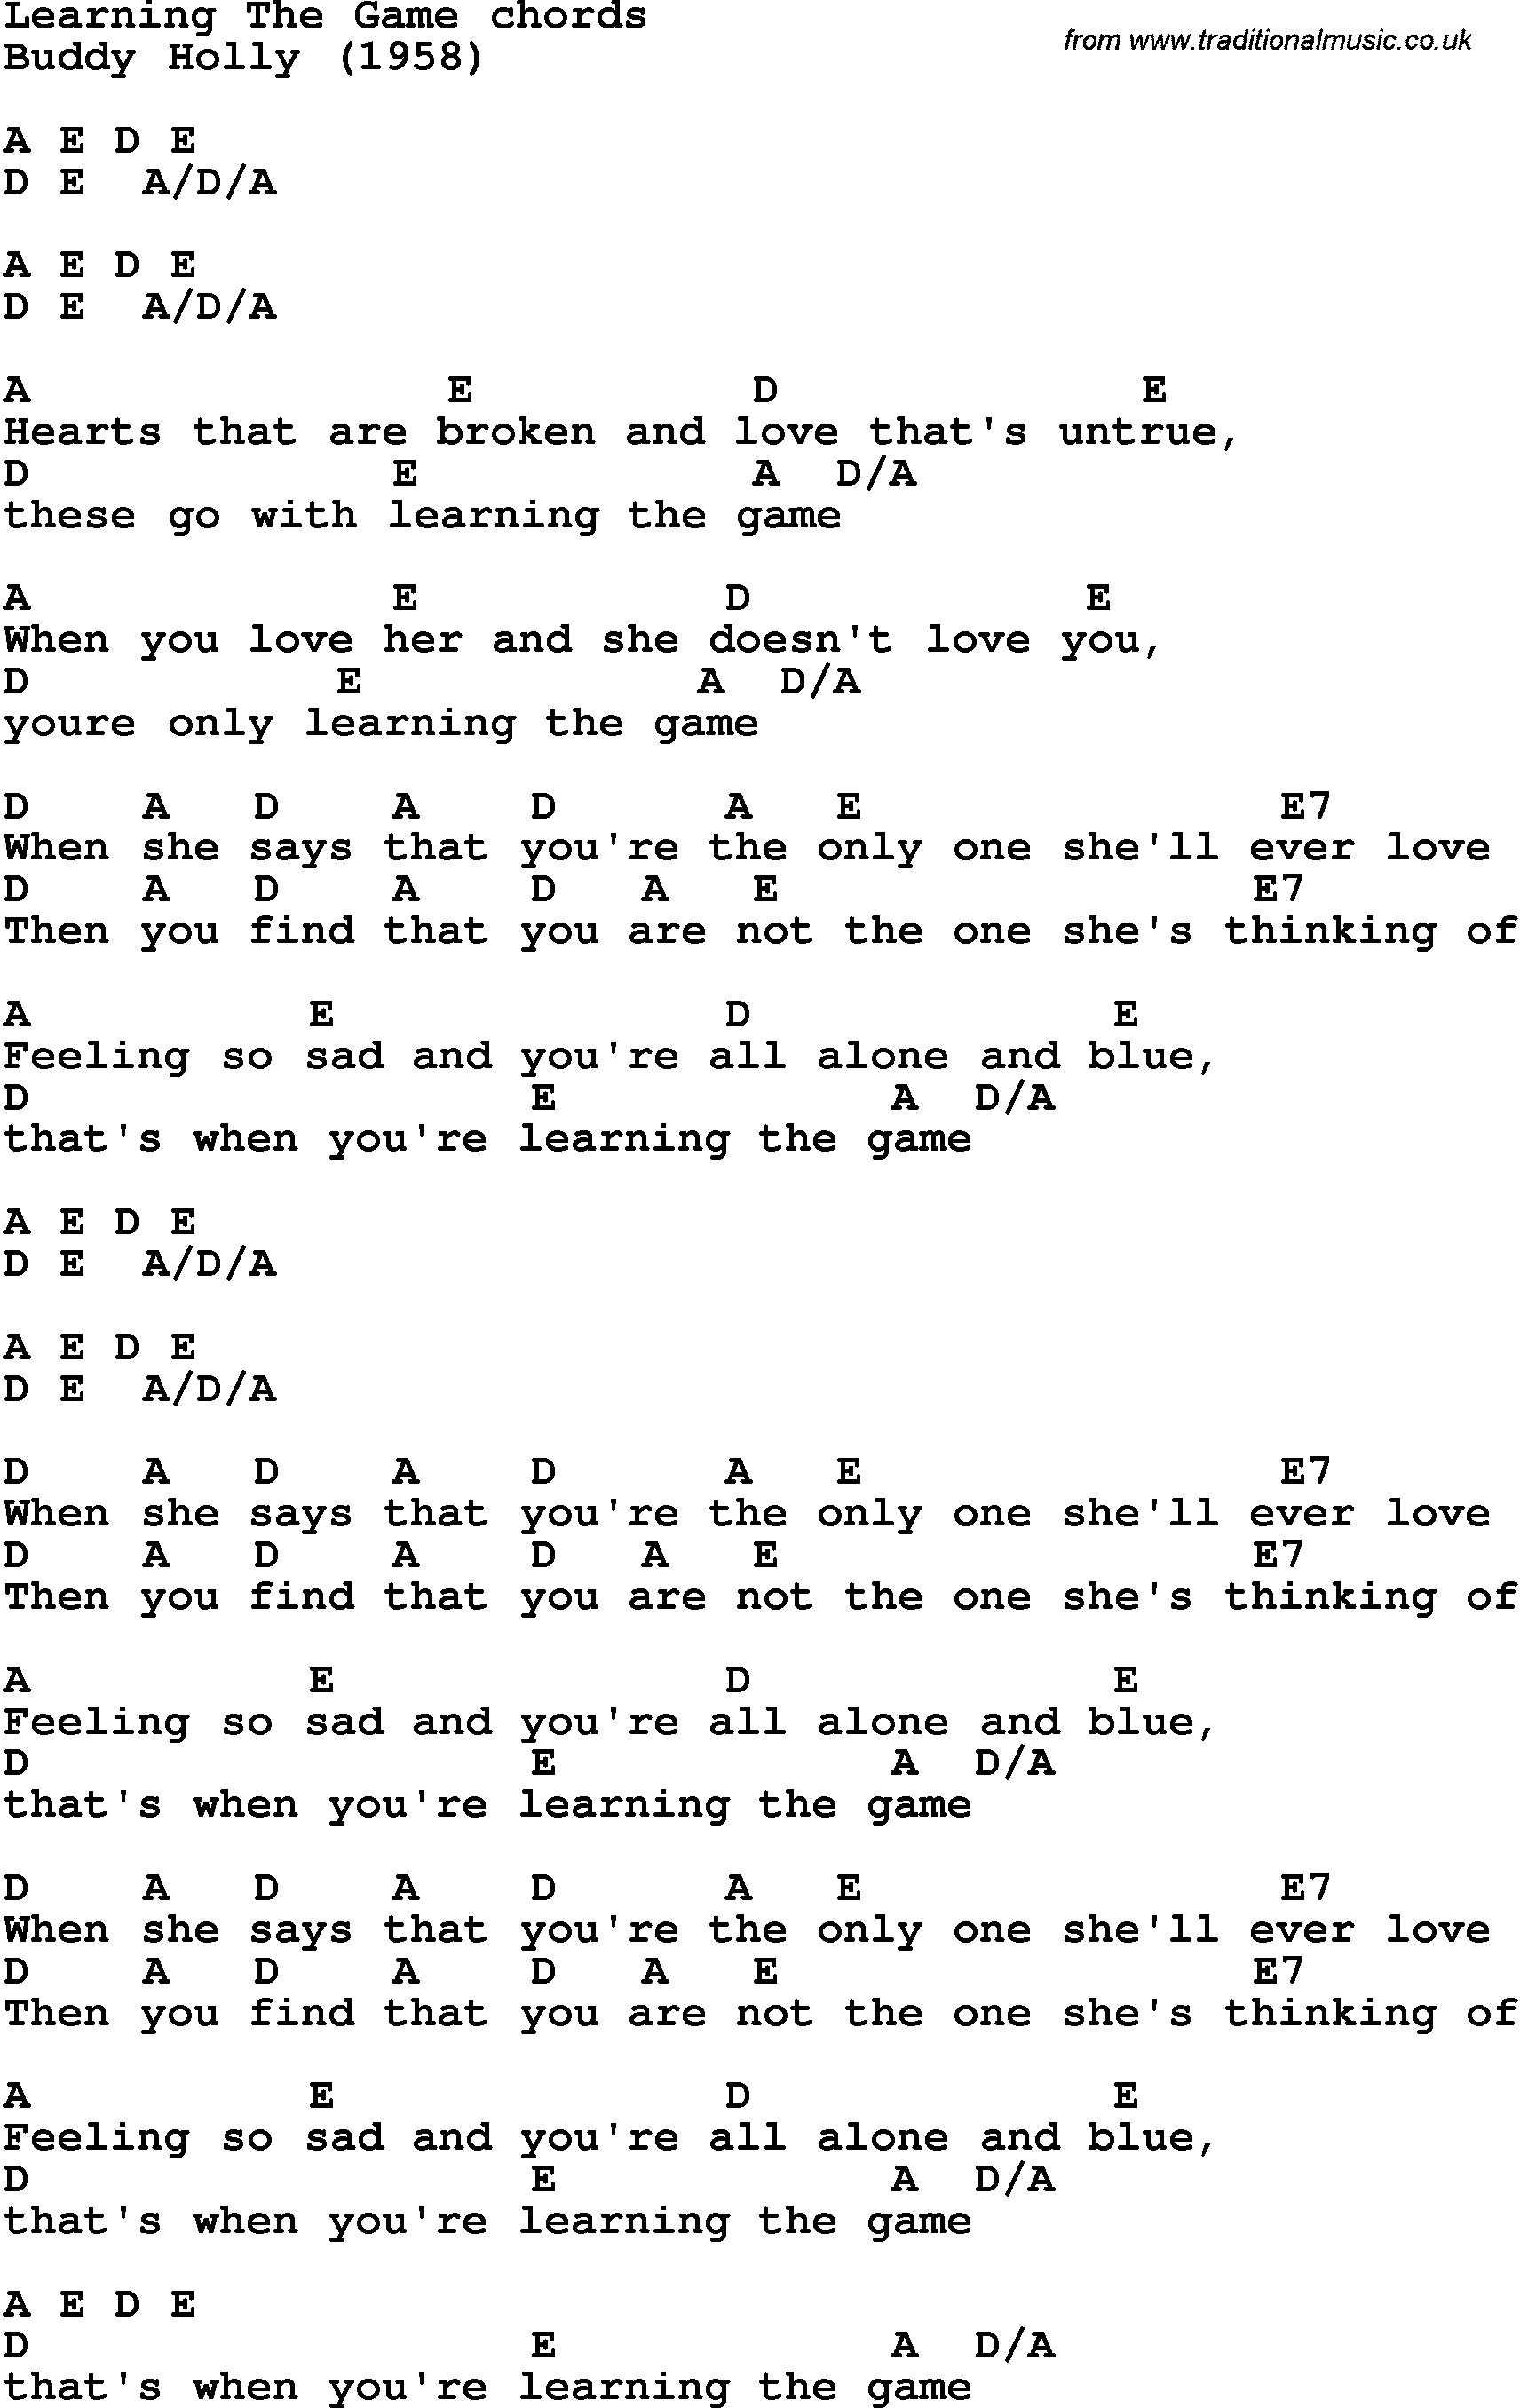 Song Lyrics with guitar chords for Learning The Game